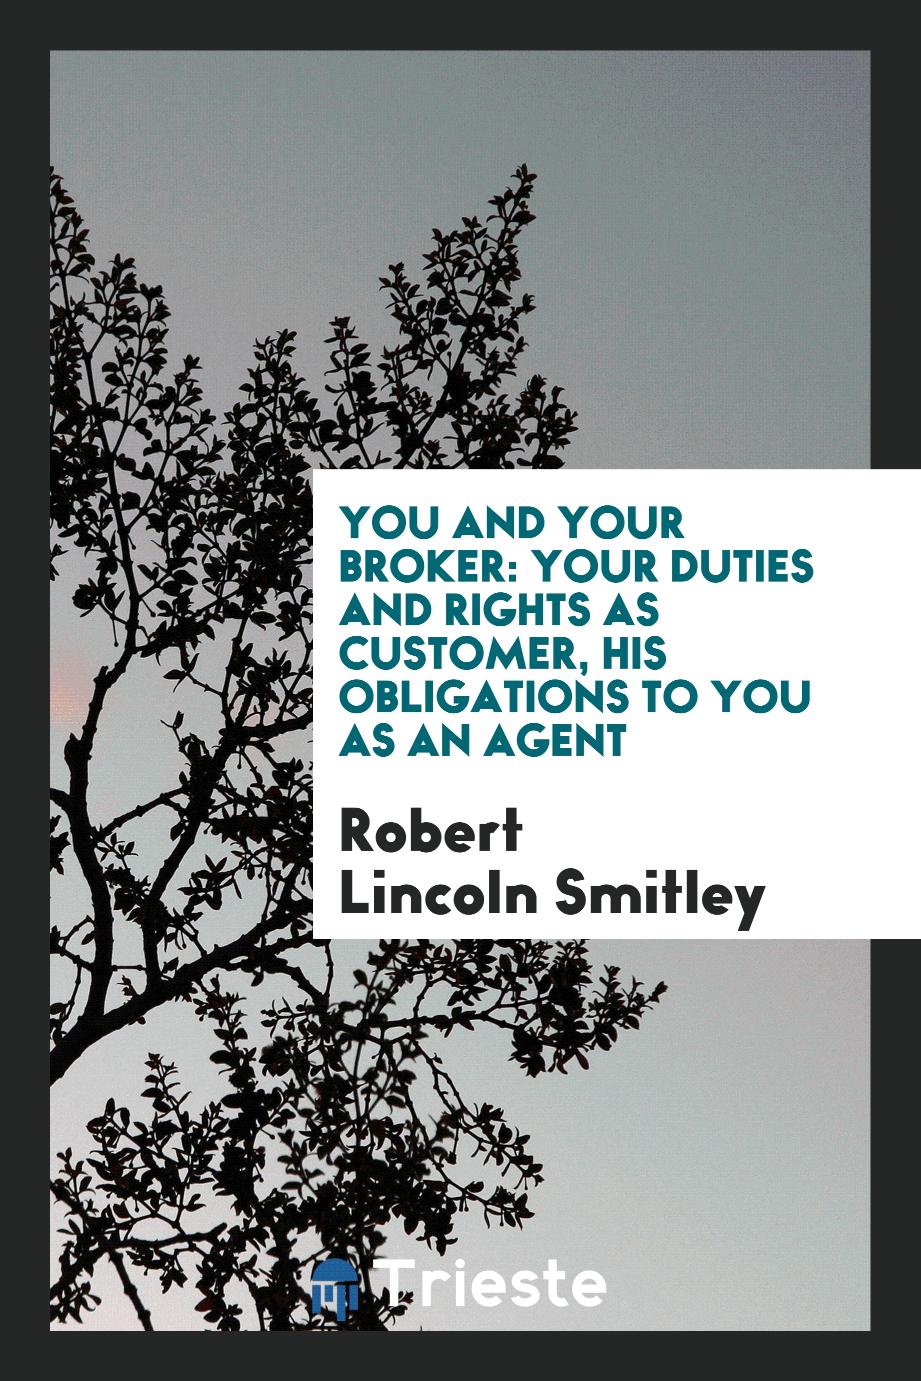 You and Your Broker: Your Duties and Rights as Customer, His Obligations to you as an agent